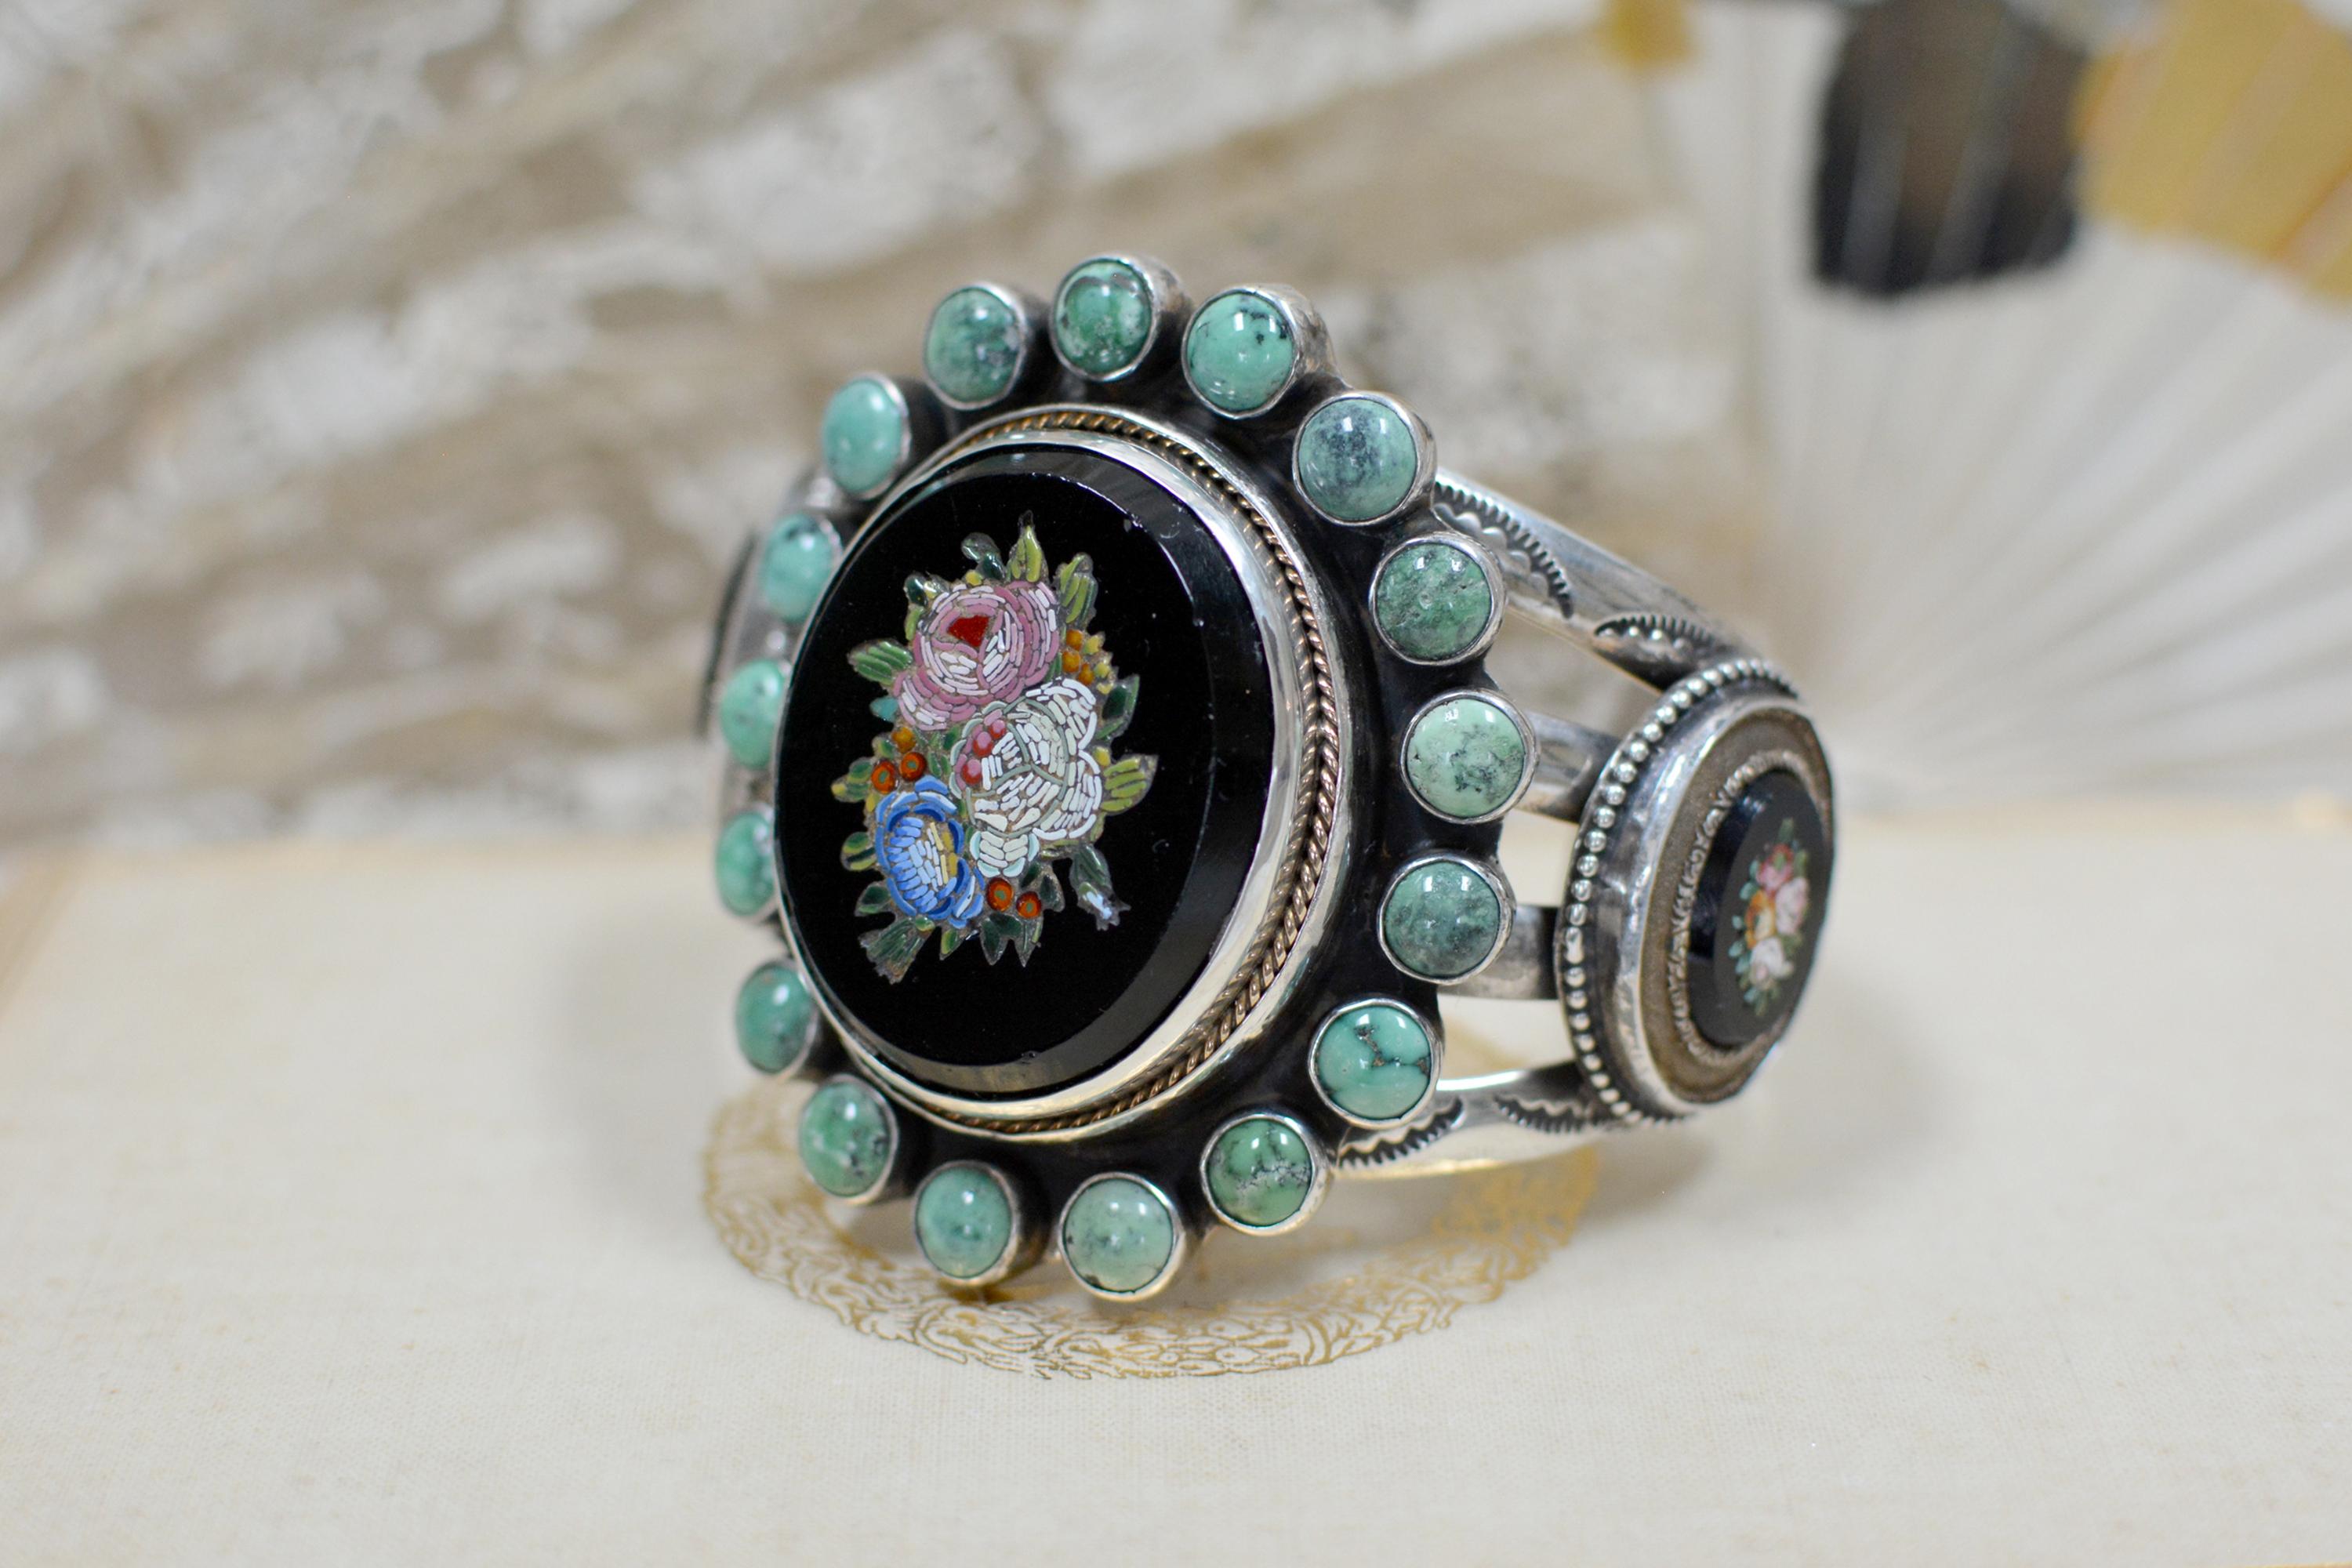 This meticulously hand crafted, one of a kind, sterling silver cuff bracelet features a large antique nineteenth century Venetian tesserae micro mosaic at its center. The mosaic bouquet has delightful shades of pink, yellow and and jade green